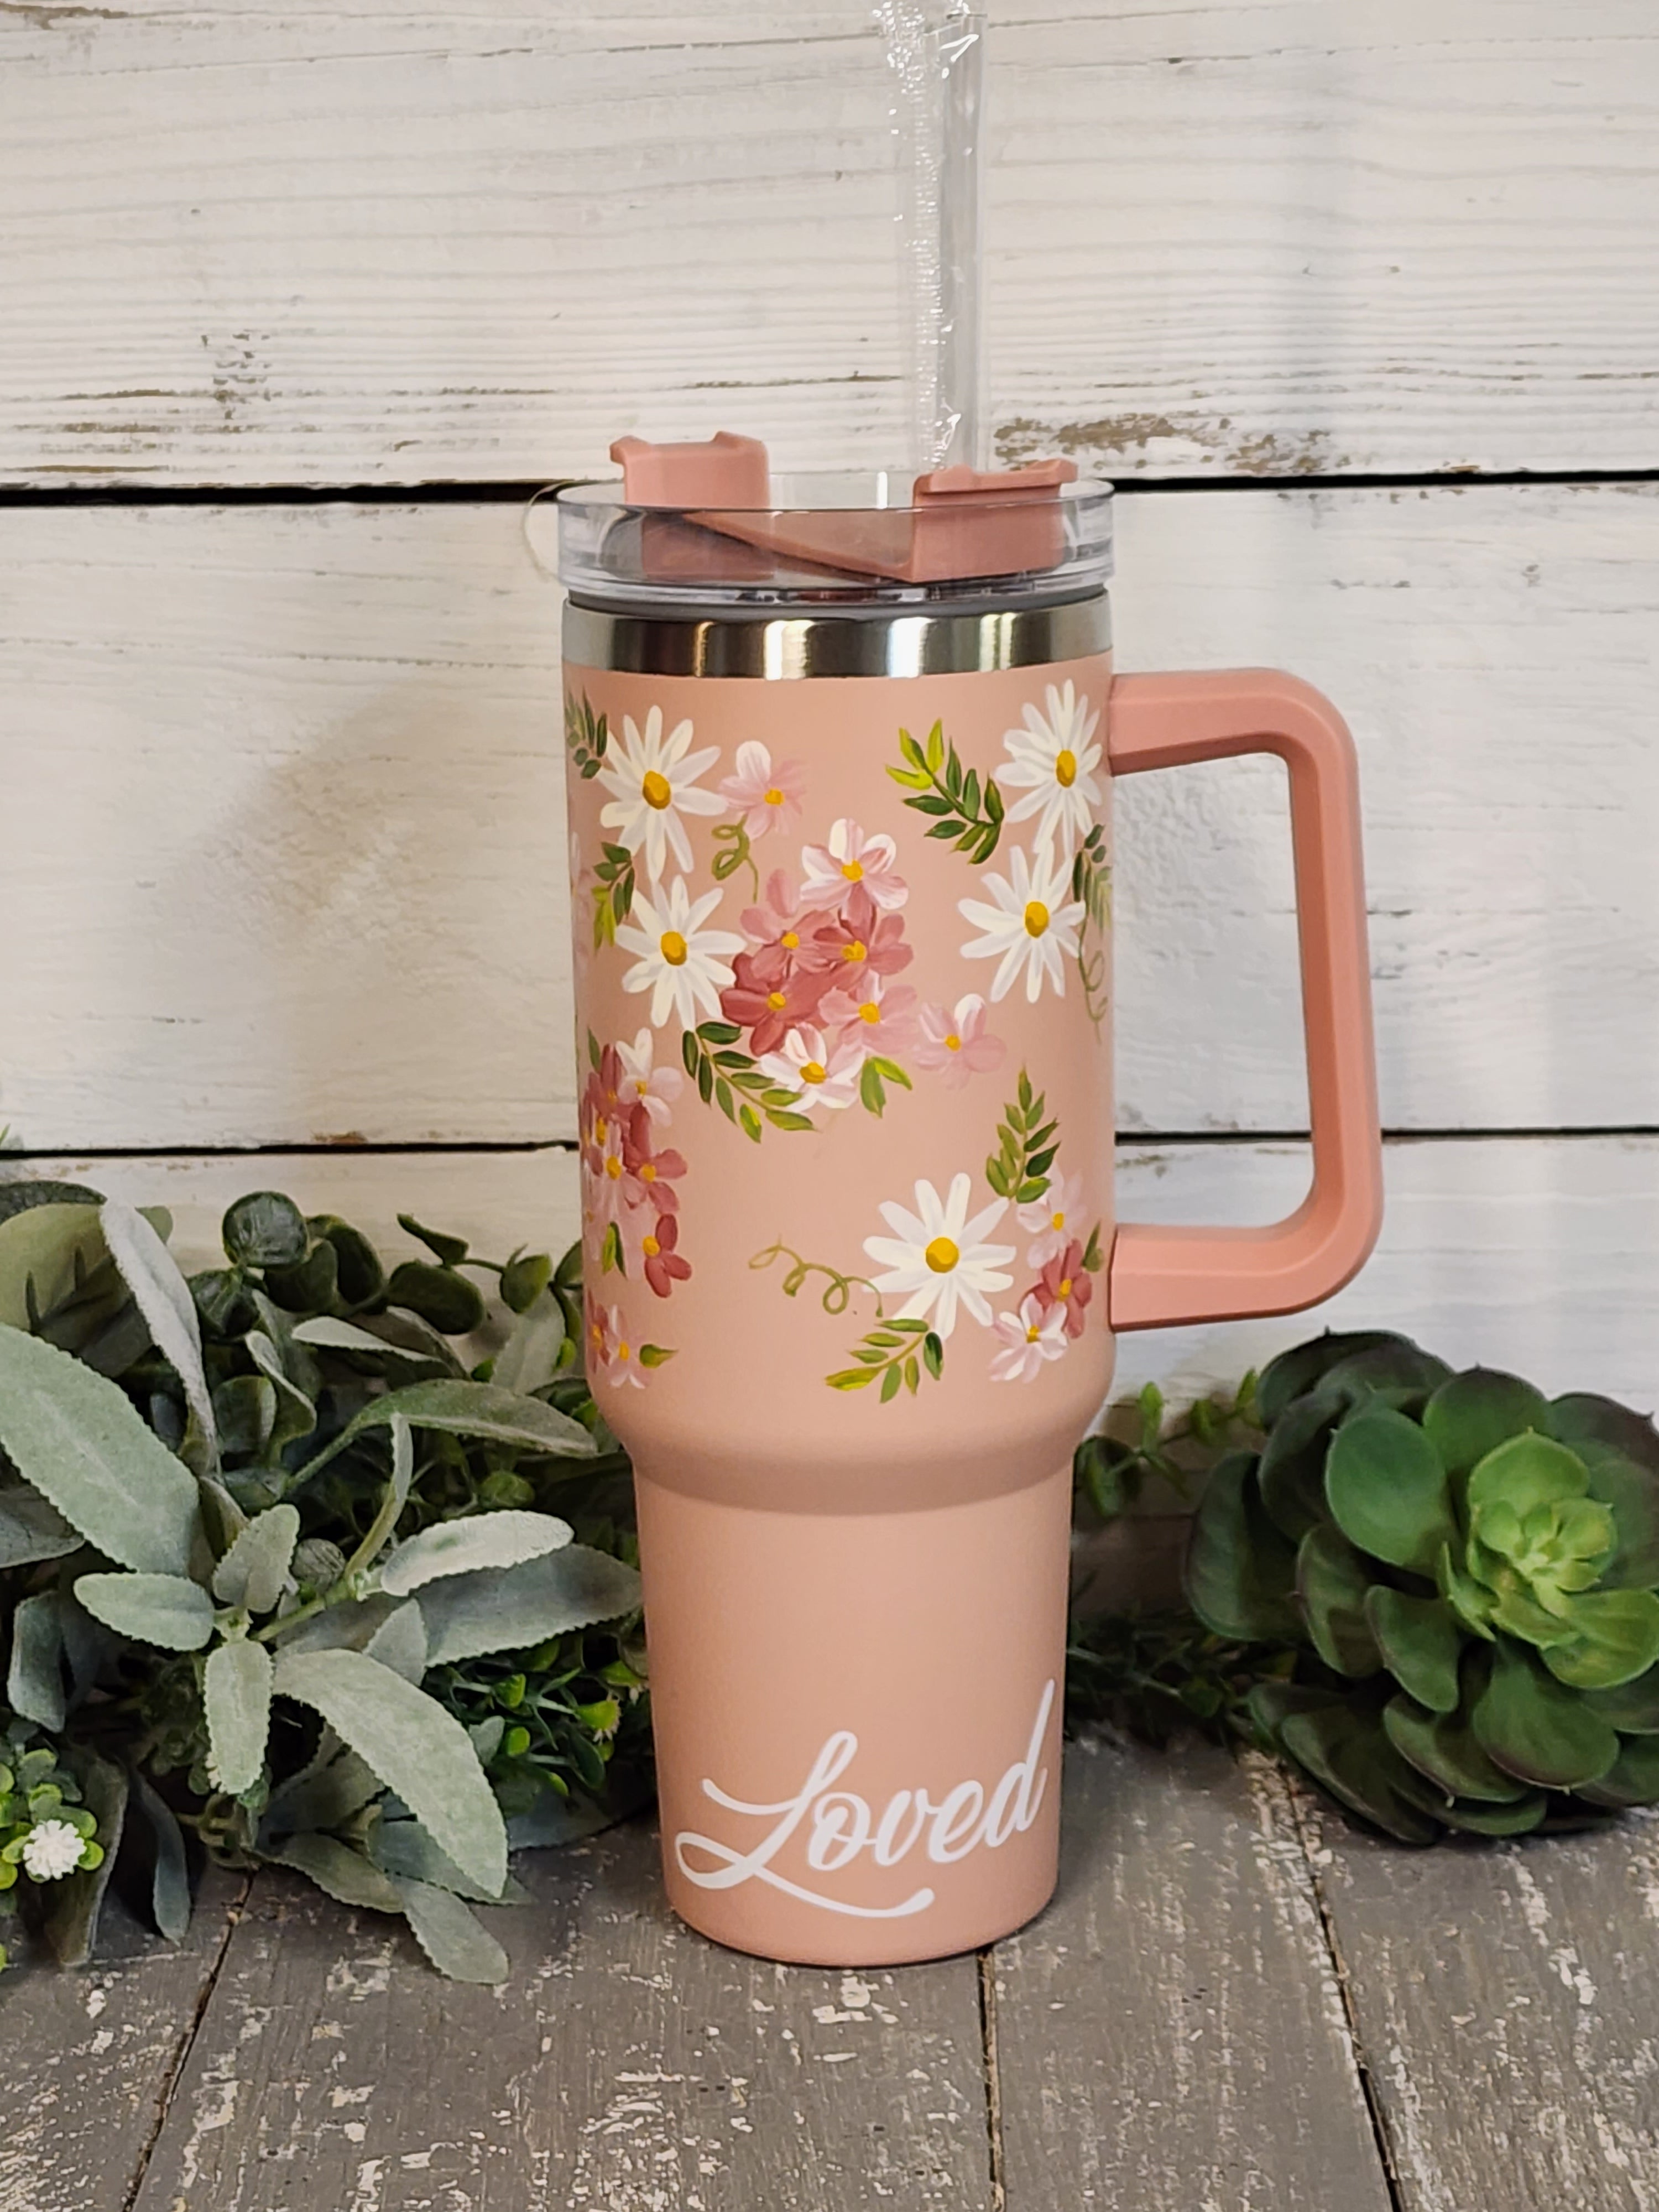 Blush 40oz tumbler with handle, Women's Christmas Gift, Stanley Dupe with hand painted flowers, "Loved", one of a kind floral design, water bottle